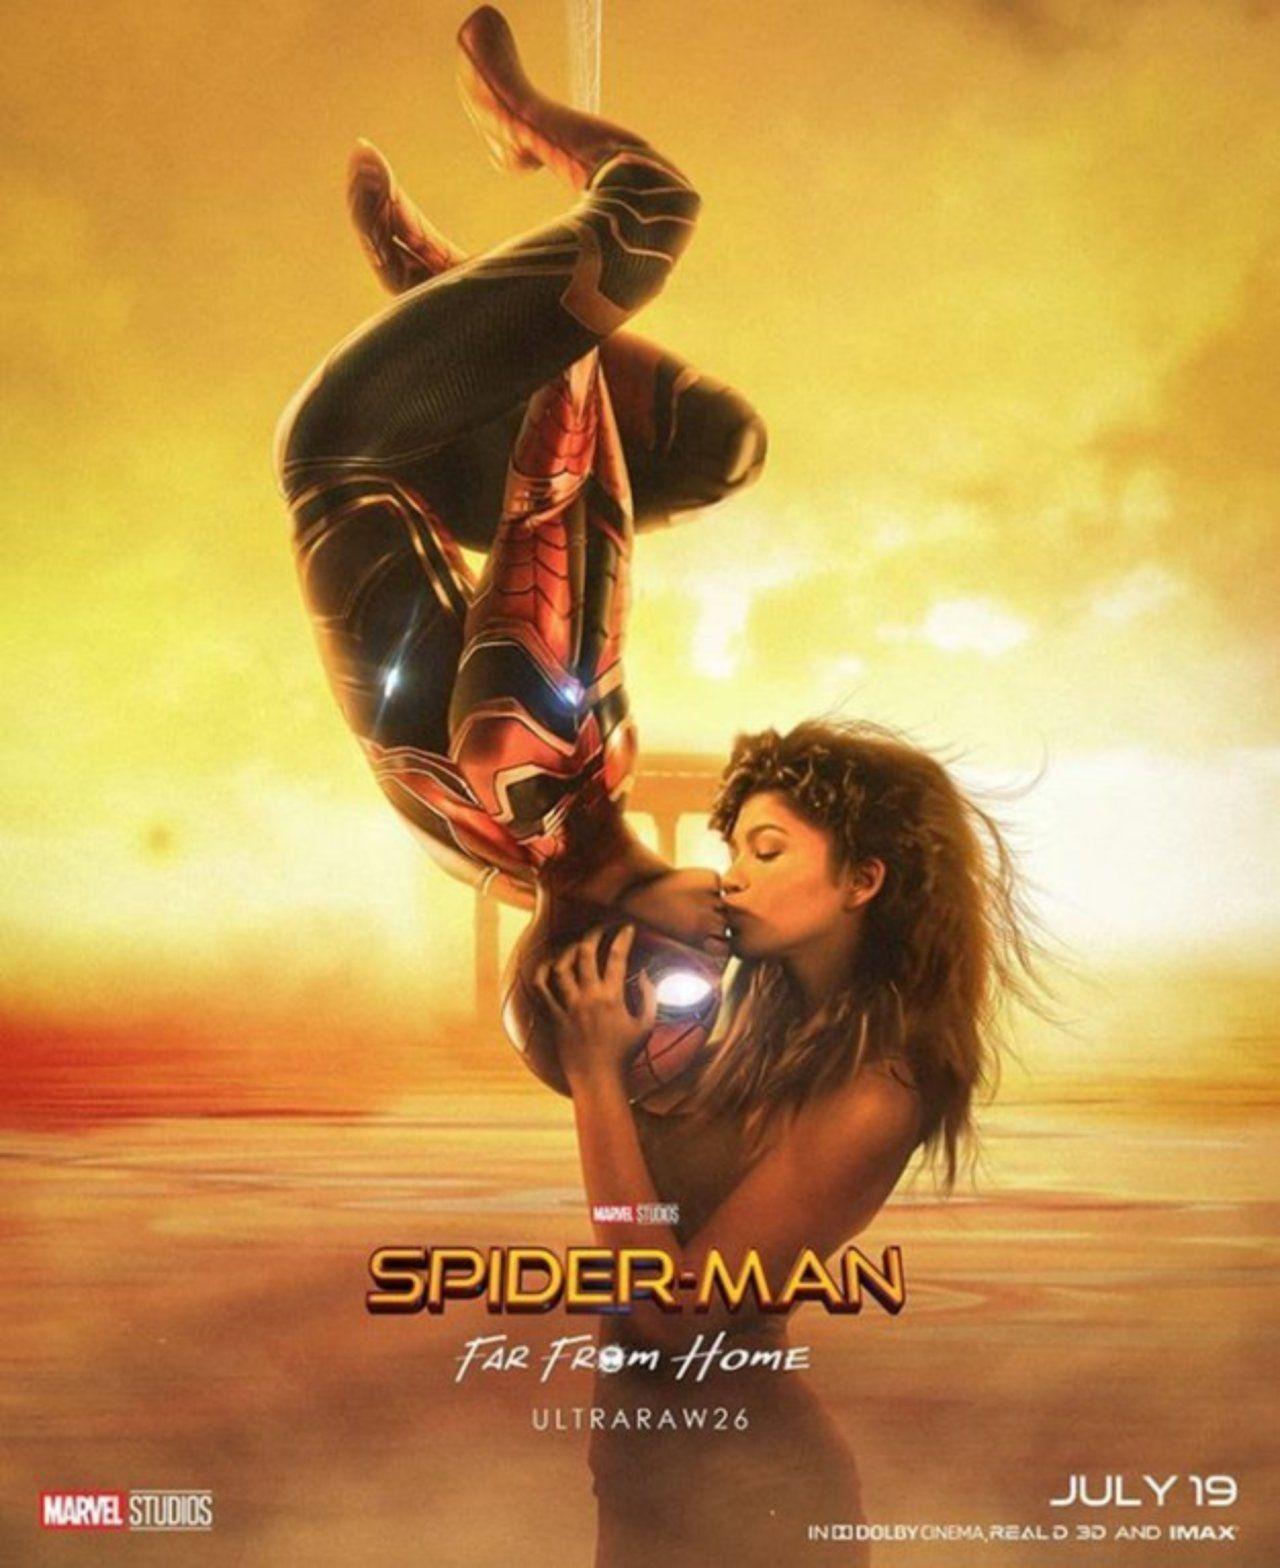 Spider Man: Far From Home' Fan Poster Pays Tribute To Original Film